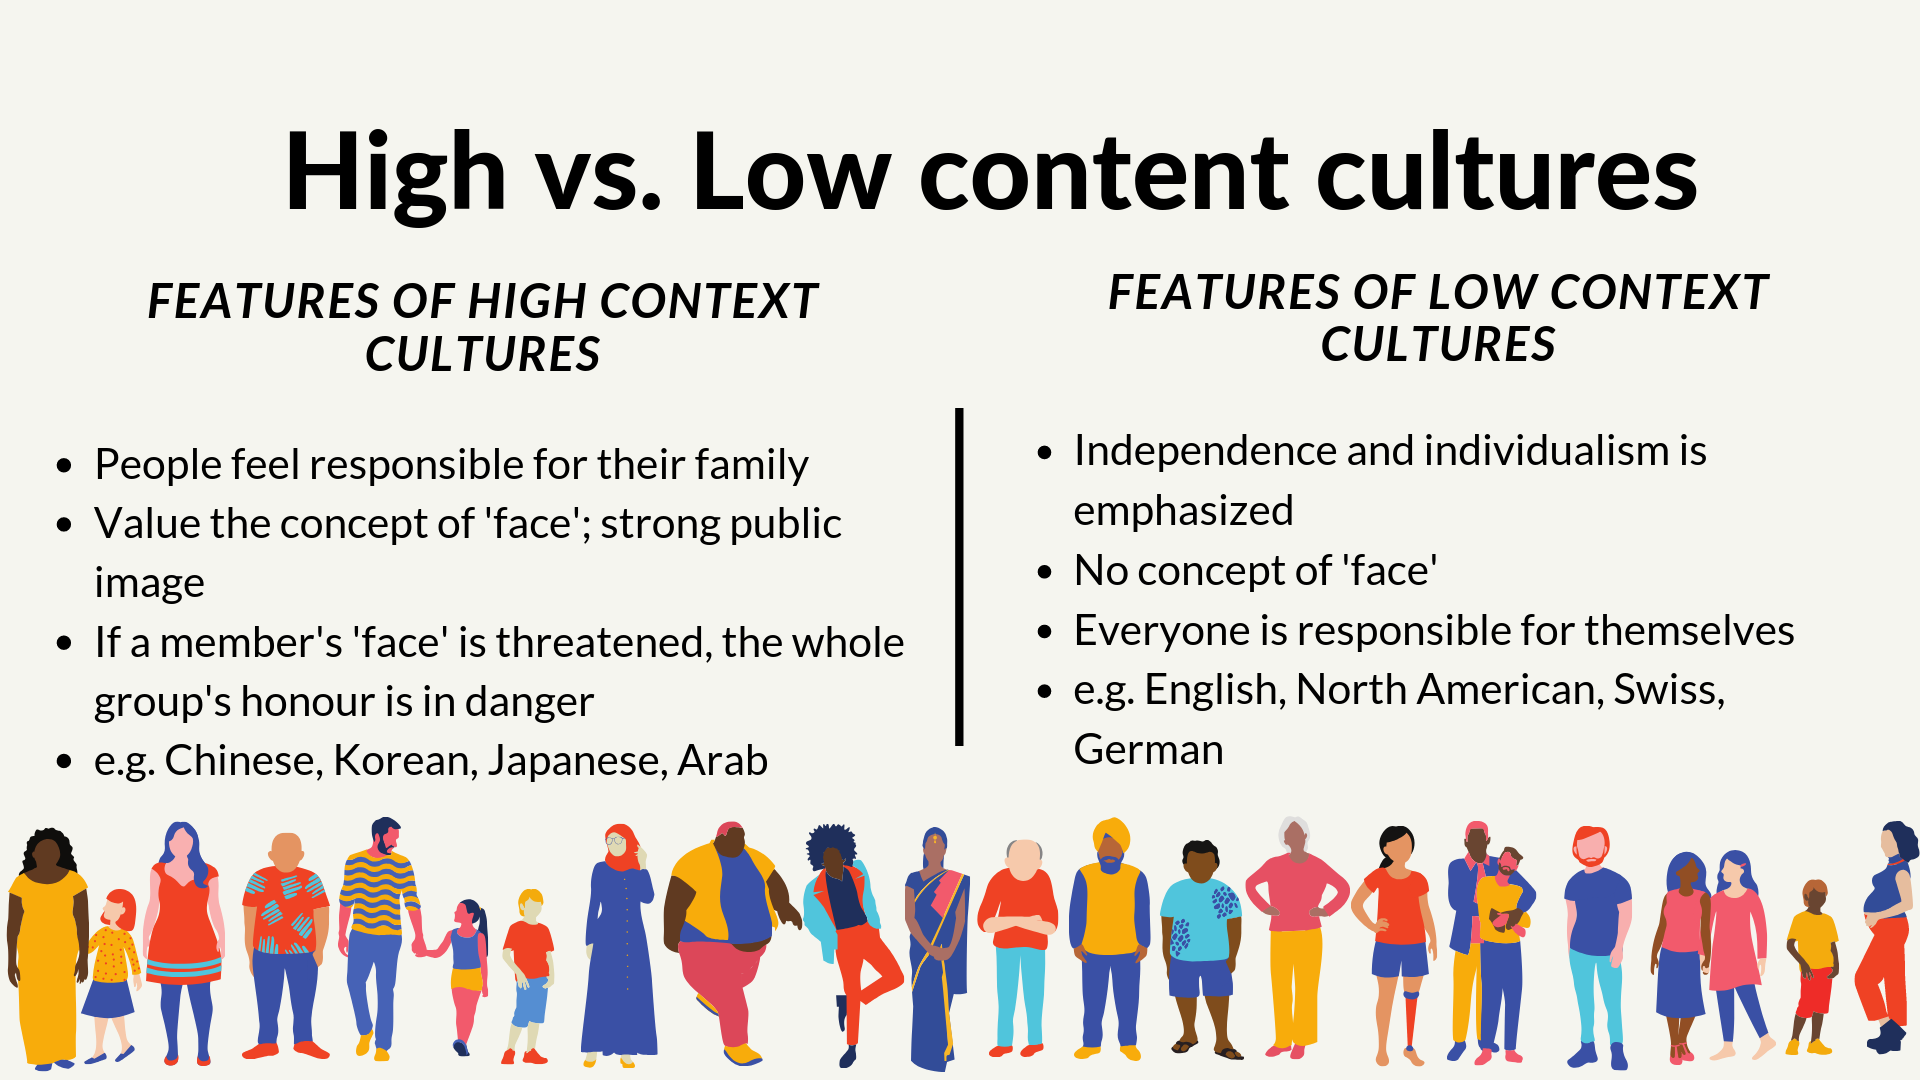 High vs low context cultures. High context cultures include Chinese, Korean, Japanese, and Arabs whereas low context cultures include English, North American, Swiss, German.